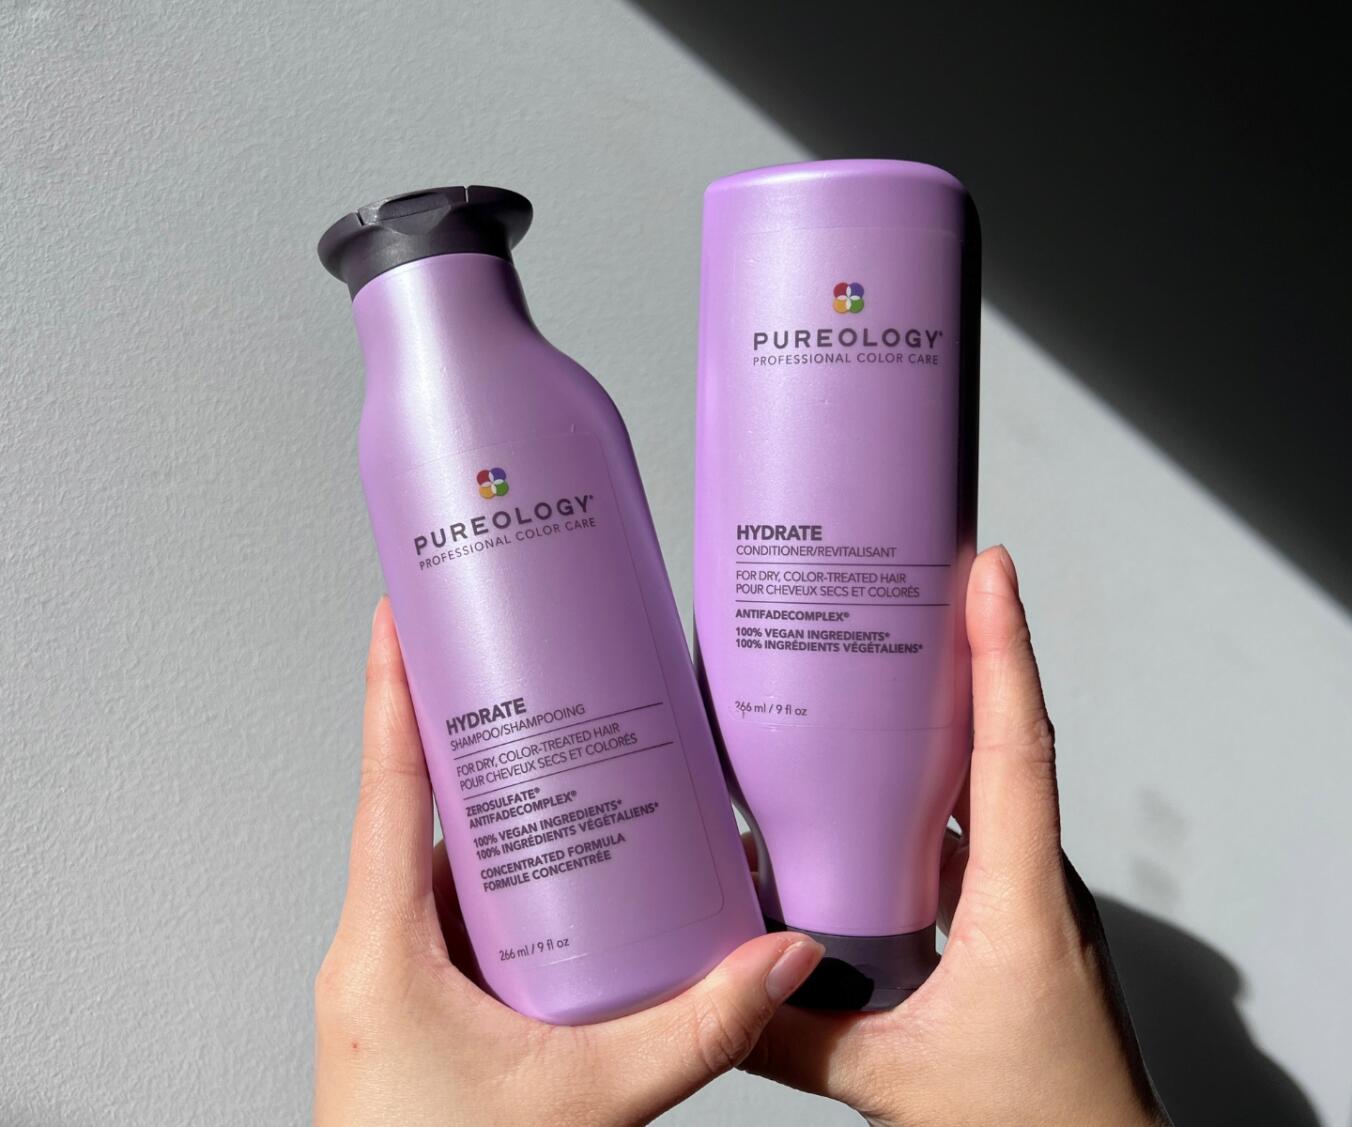 Pureology Hydrate shampoo and conditioner set